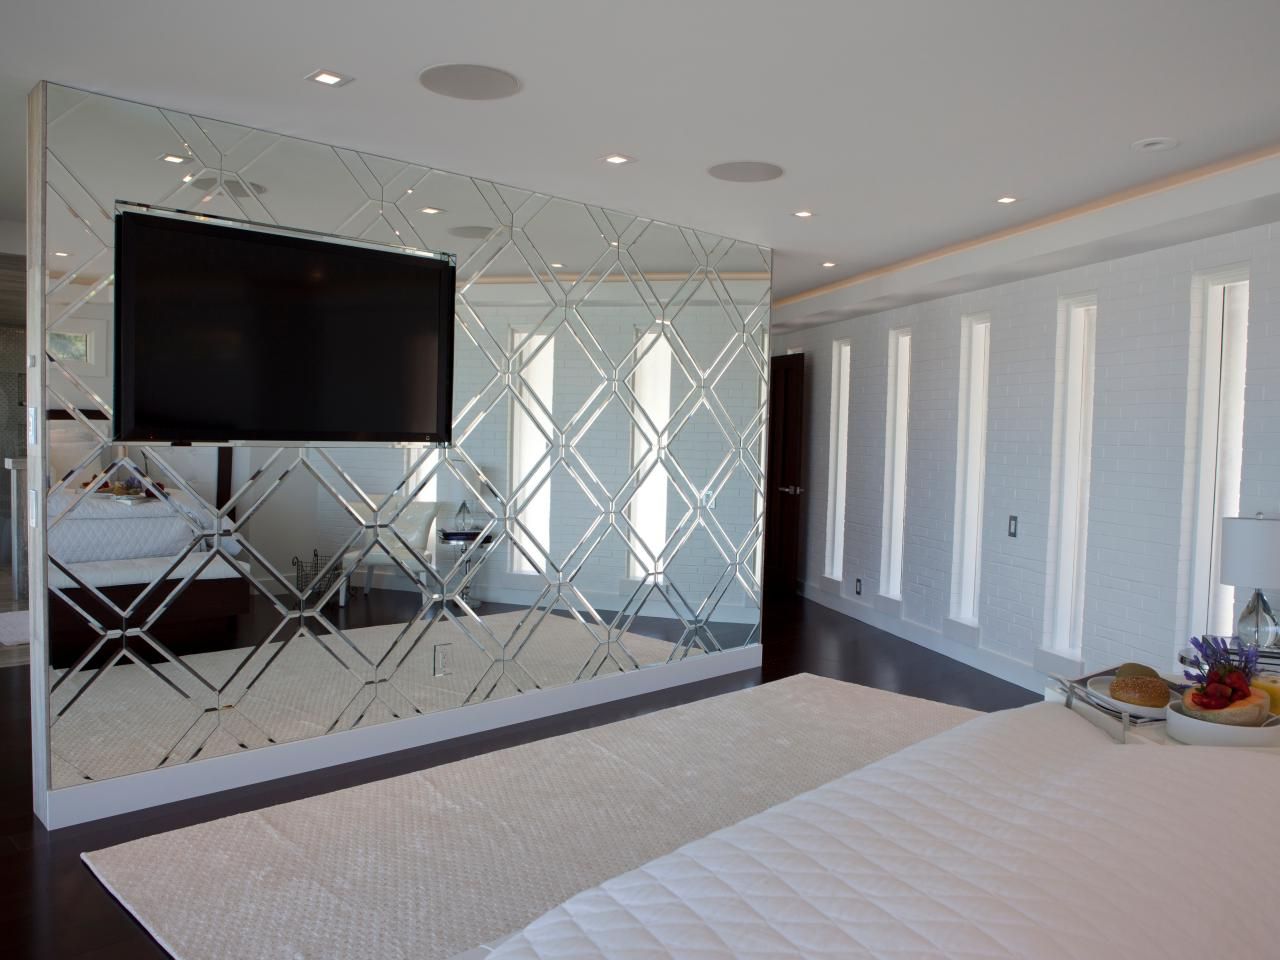 Long Wall Mirrors For Bedroom Intended For 2019 Bedroom Wall Mirror Houzz Design Ideas Bathroom Mirrors (View 9 of 20)